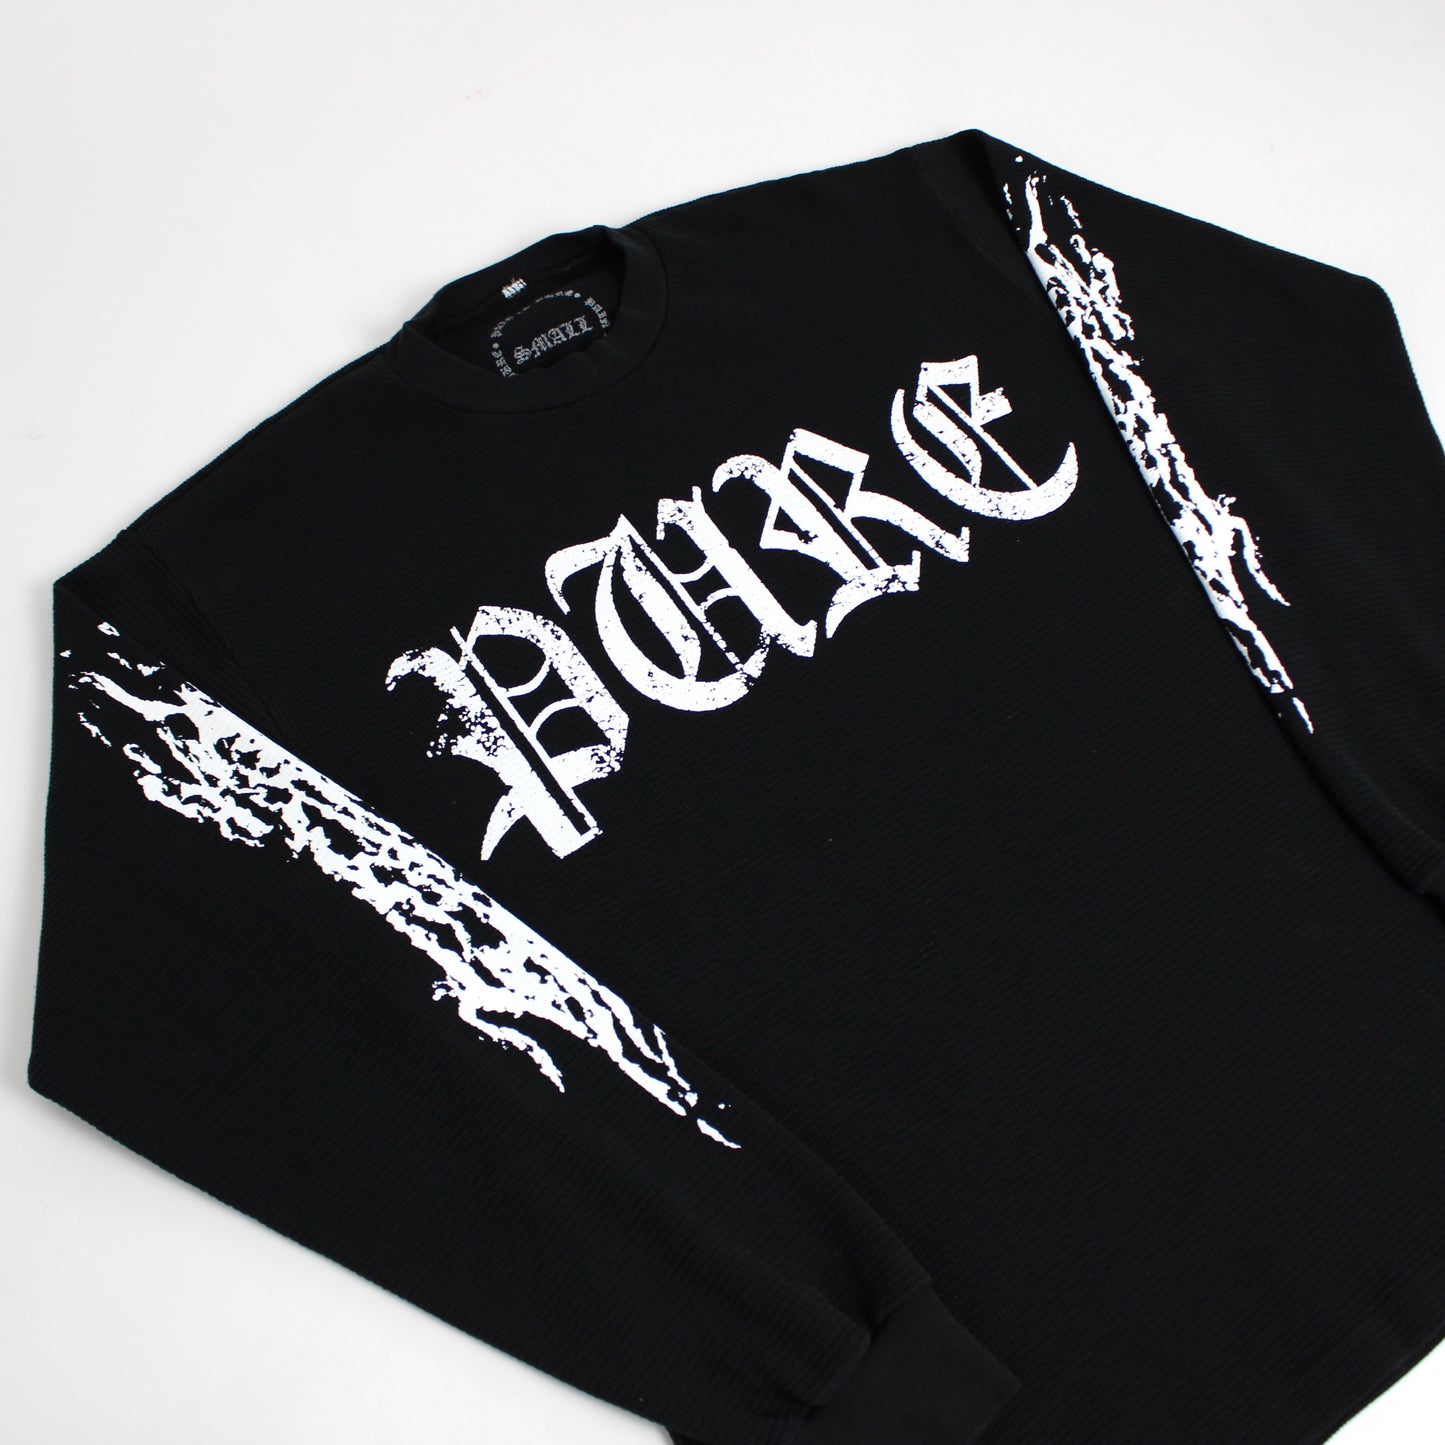 Pain is Pure 'Pure' Angel L/S Thermal Black/White